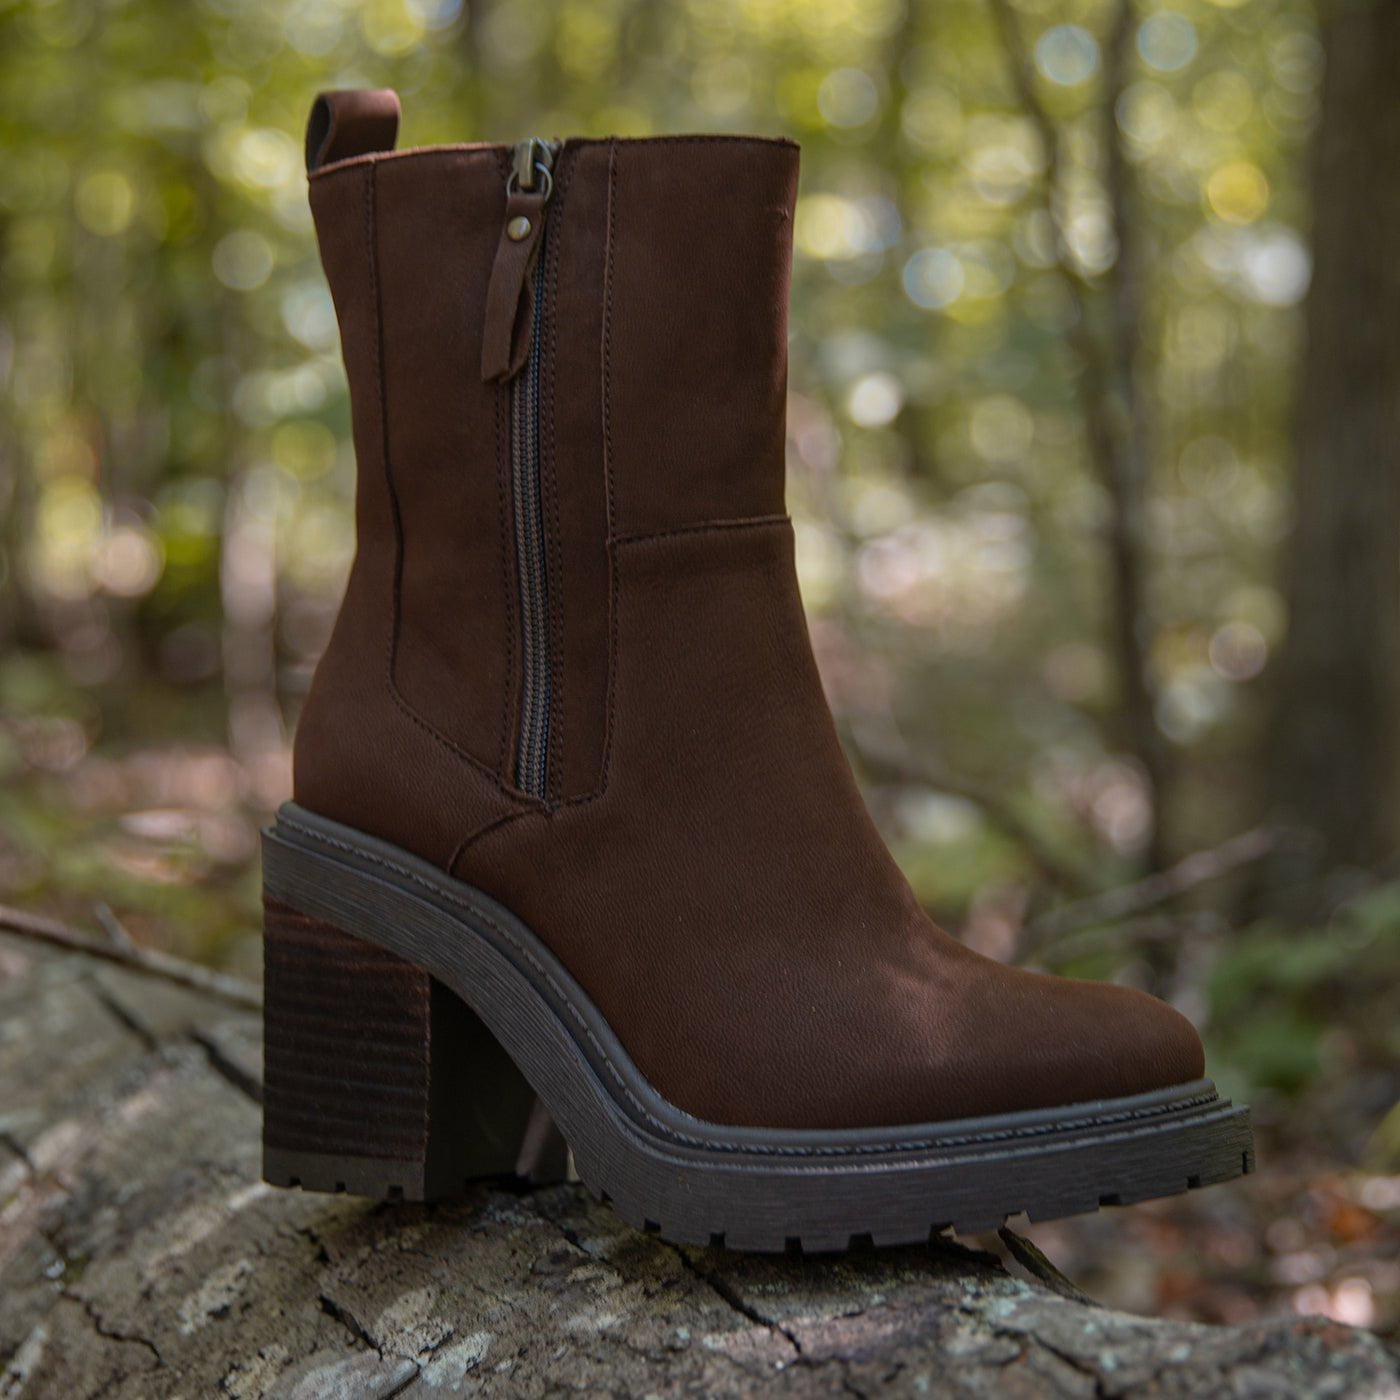 HABITUS in BROWN Heeled Ankle Boots